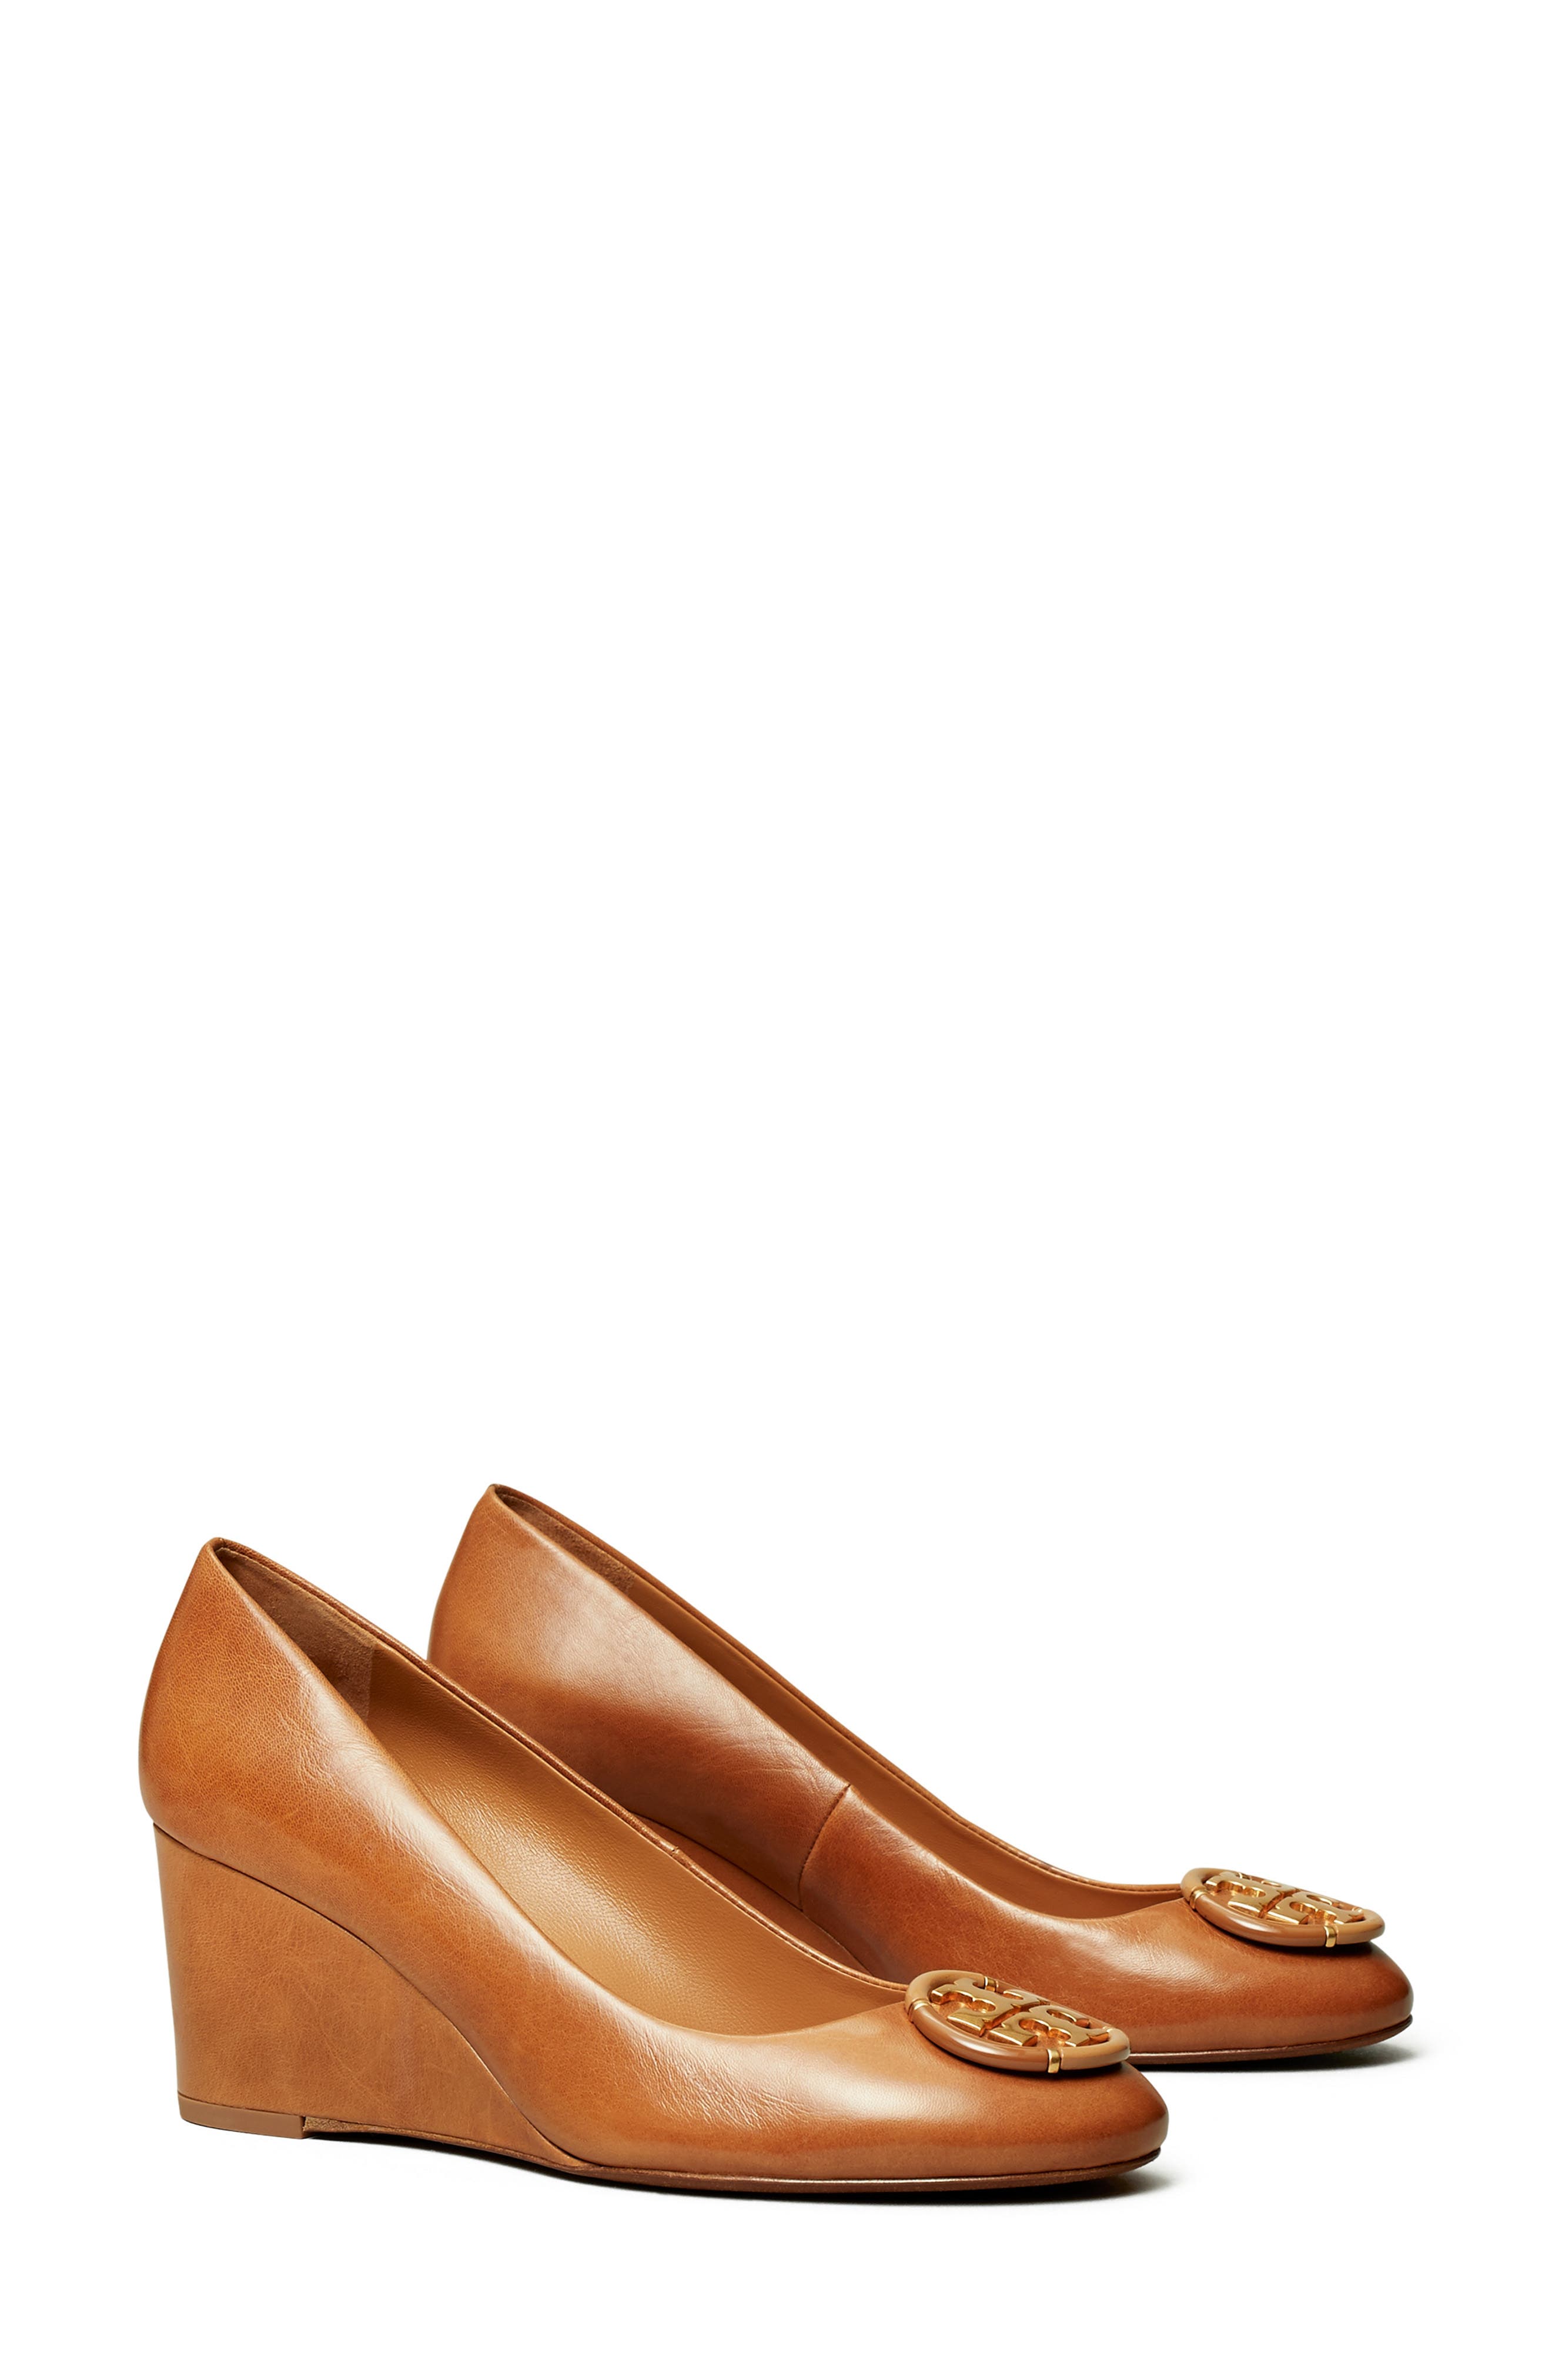 leather wedge pump